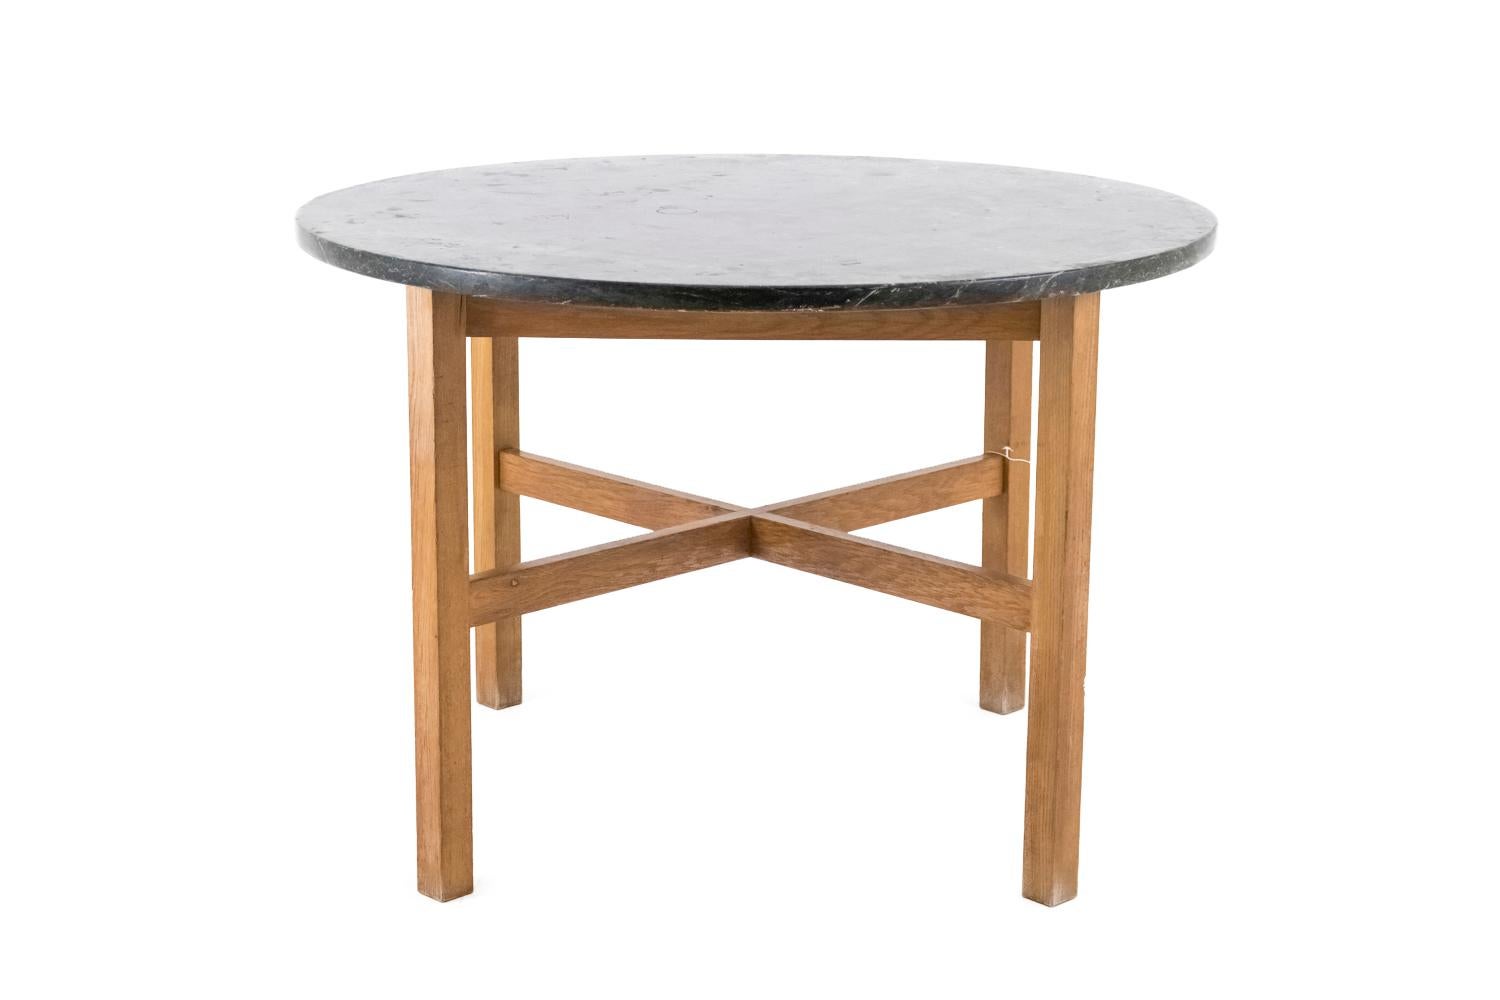 Jordi Casanblancas Muntañola, in the style of.

Circular table in beechwood and green marble standing on four square legs linked between them by a cross stretcher. Apron composed of four crossbars slighly behind the leg line supporting the